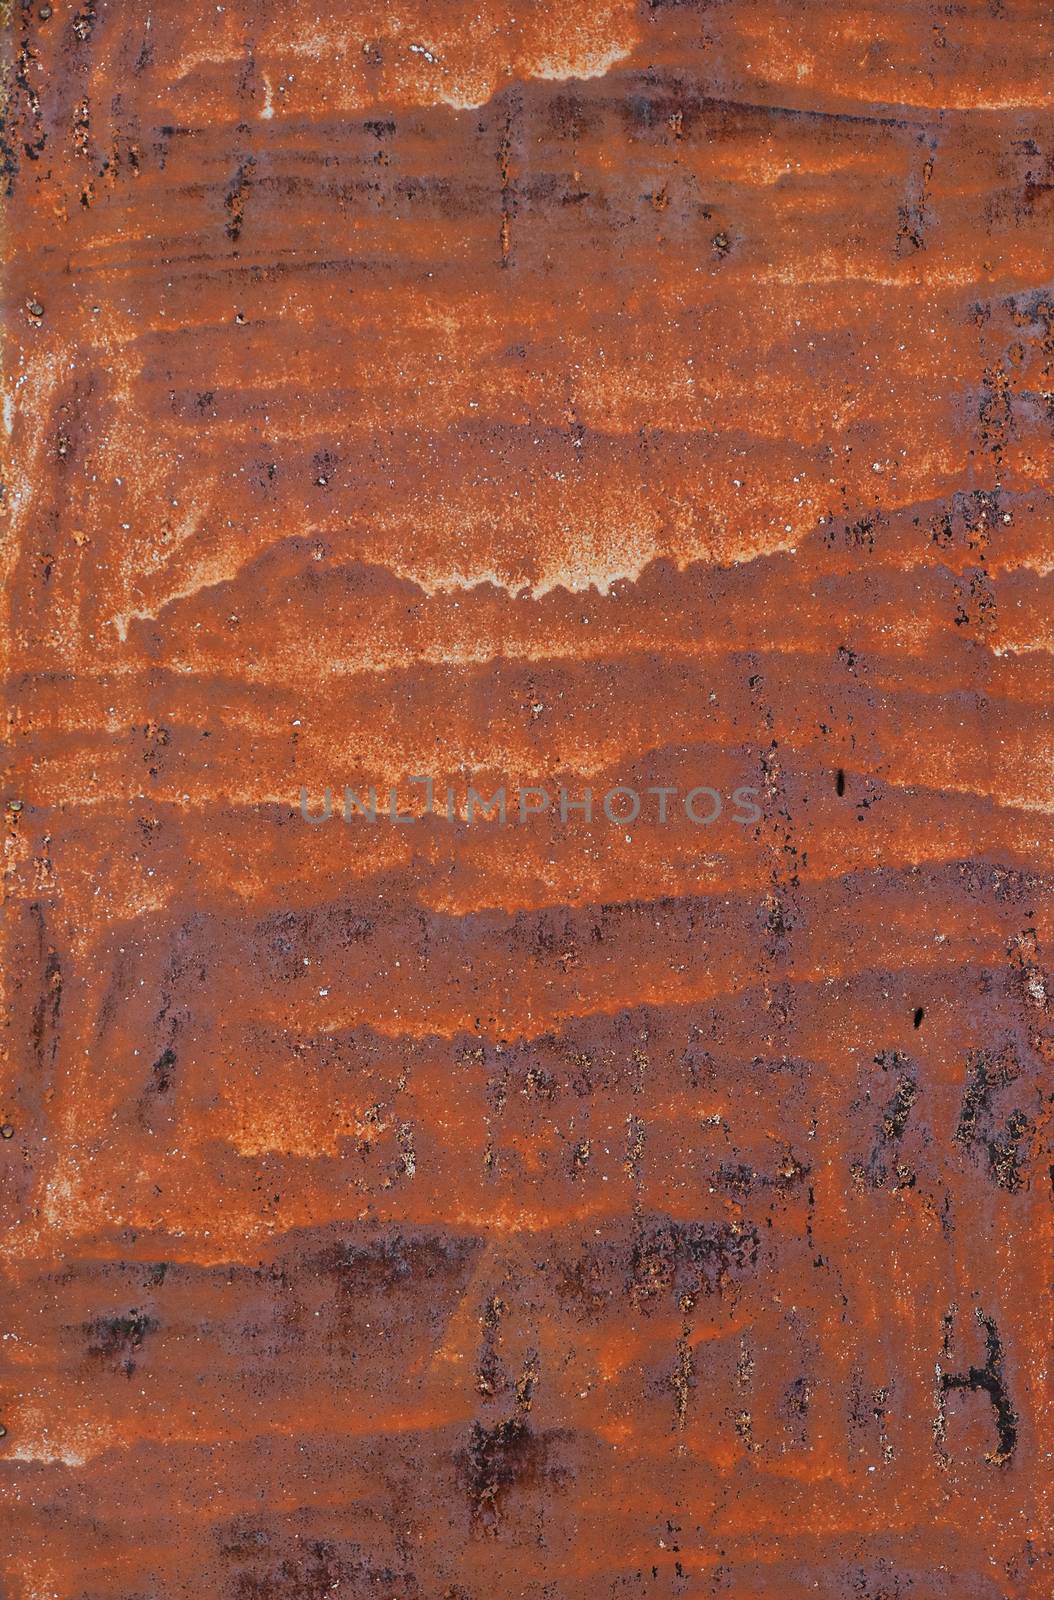 Bright rust stained corroded metal surface by BreakingTheWalls